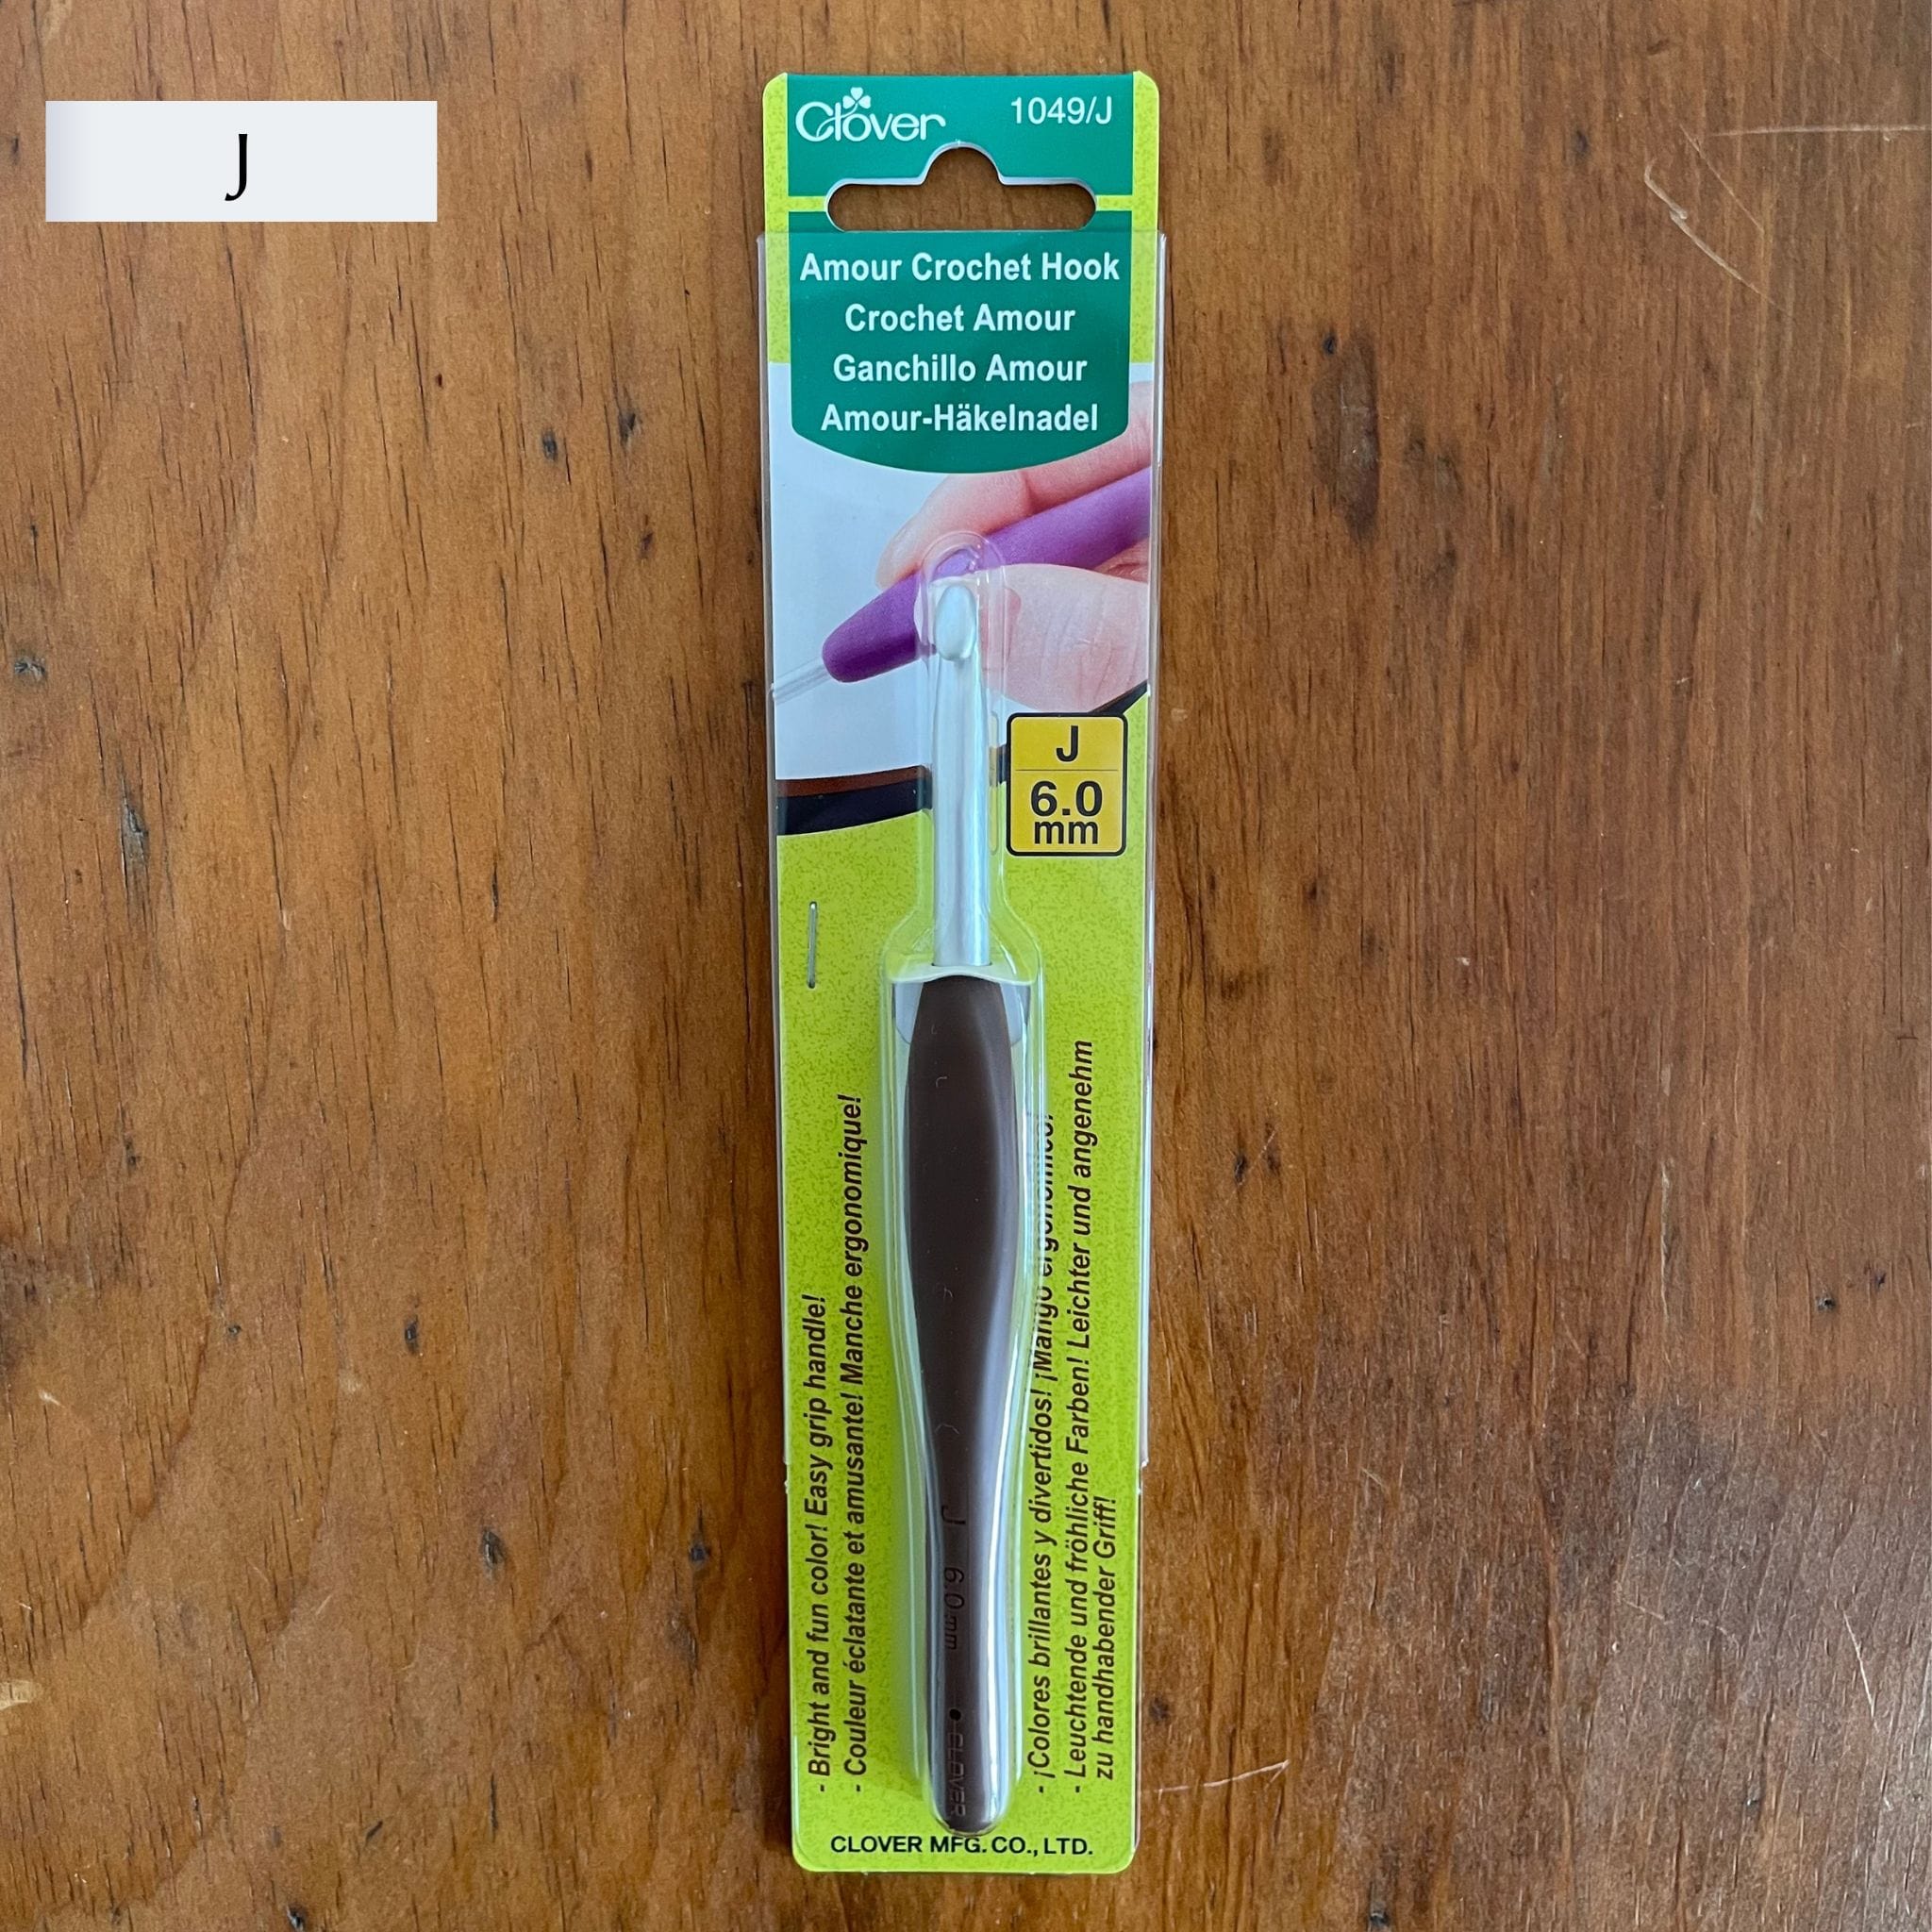 Amour Crochet Hooks – The Woolly Thistle